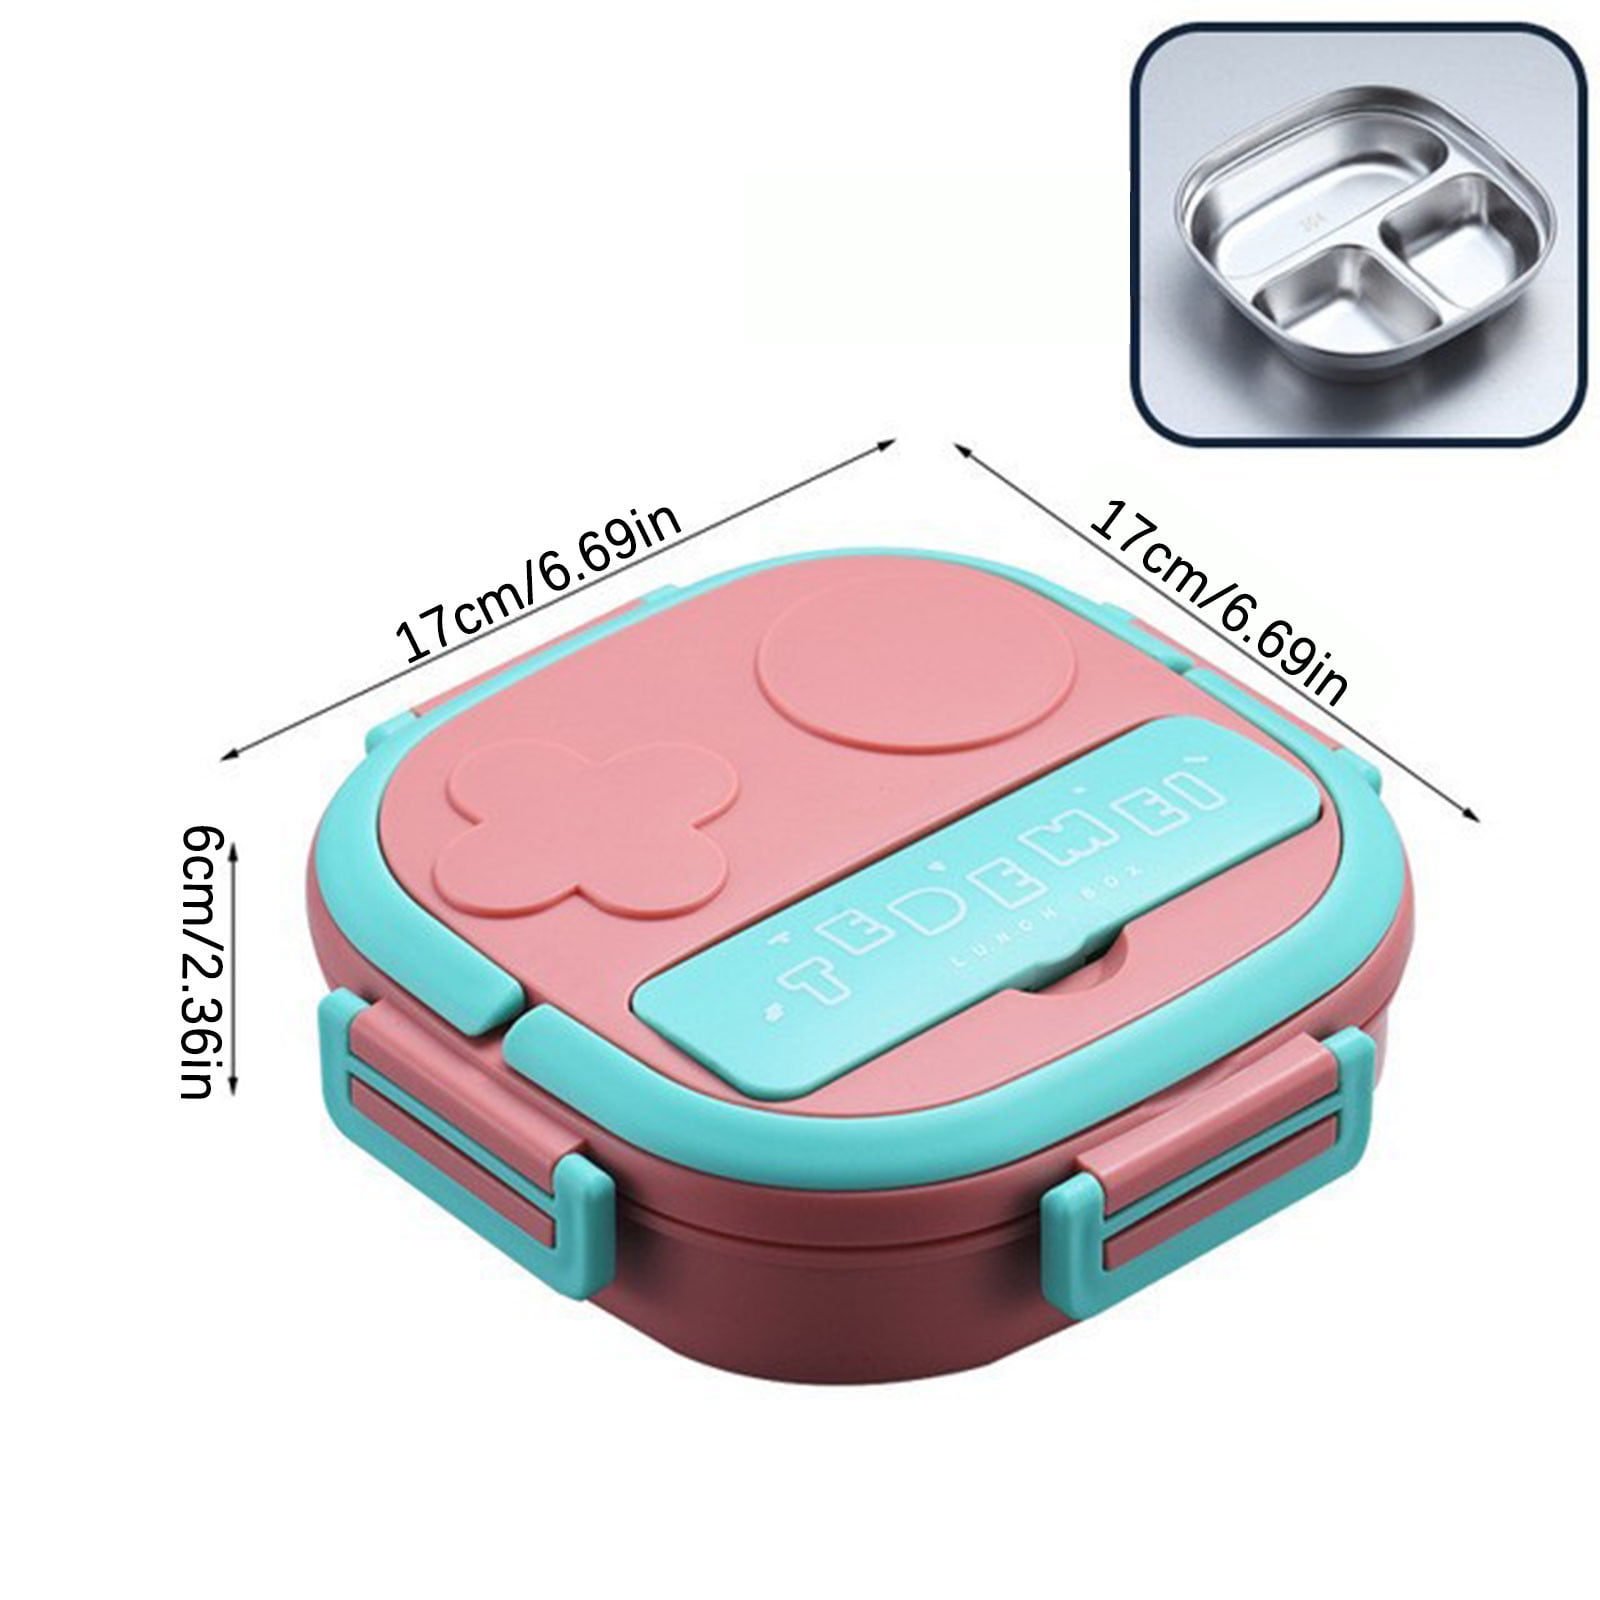 Xmmswdla Divided Bento Lunch Box with 3 Compartments, Portable Thermal Lunch Container for Kid Adult to School Work, Stainless Steel Insulated Food